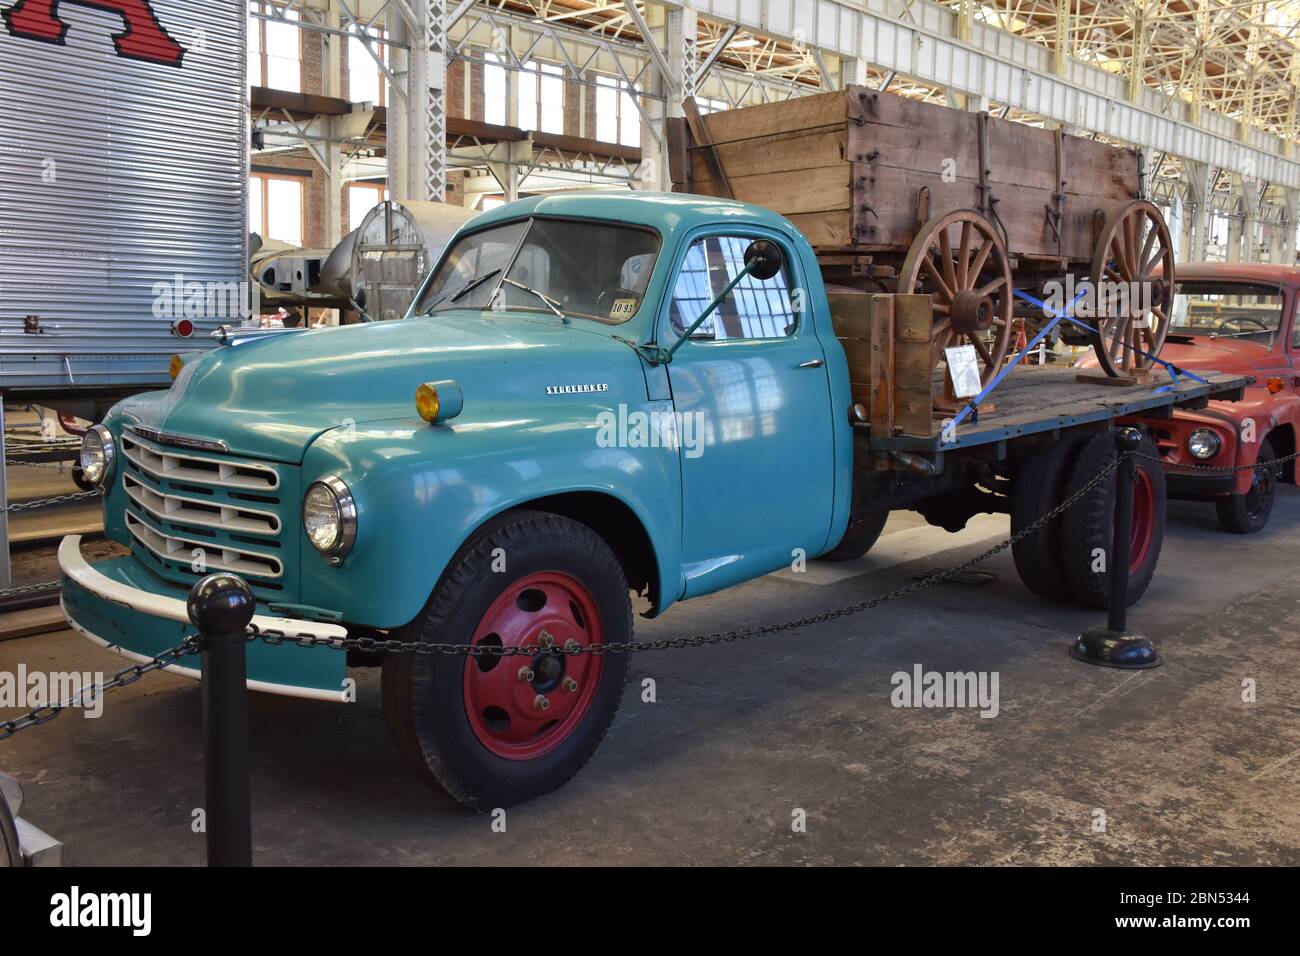 A Studebaker Truck with a wagon loaded on the back on display at the North Carolina Transportation Museum. Stock Photo